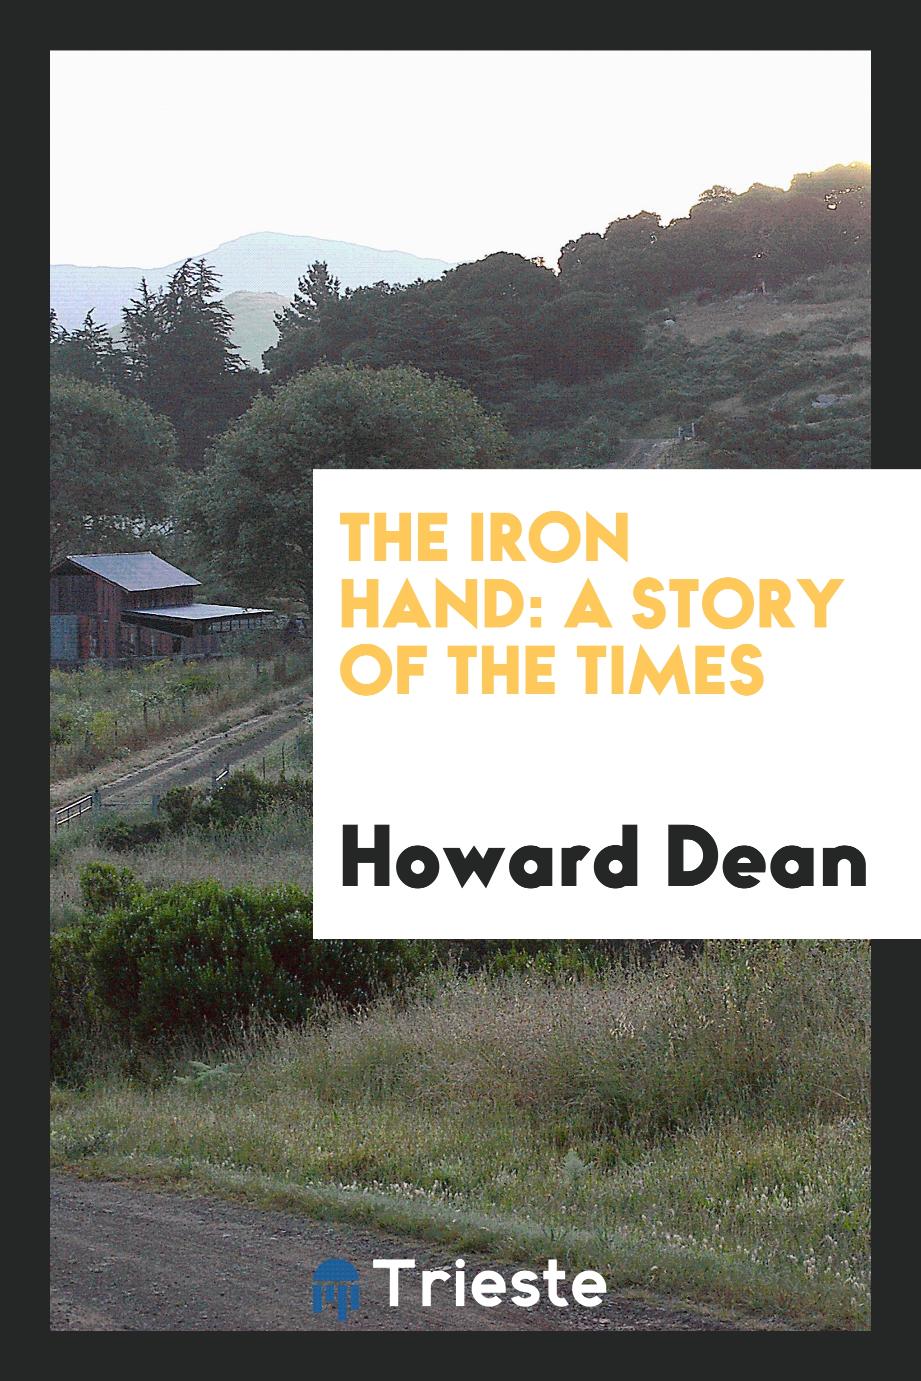 The Iron Hand: A Story of the Times